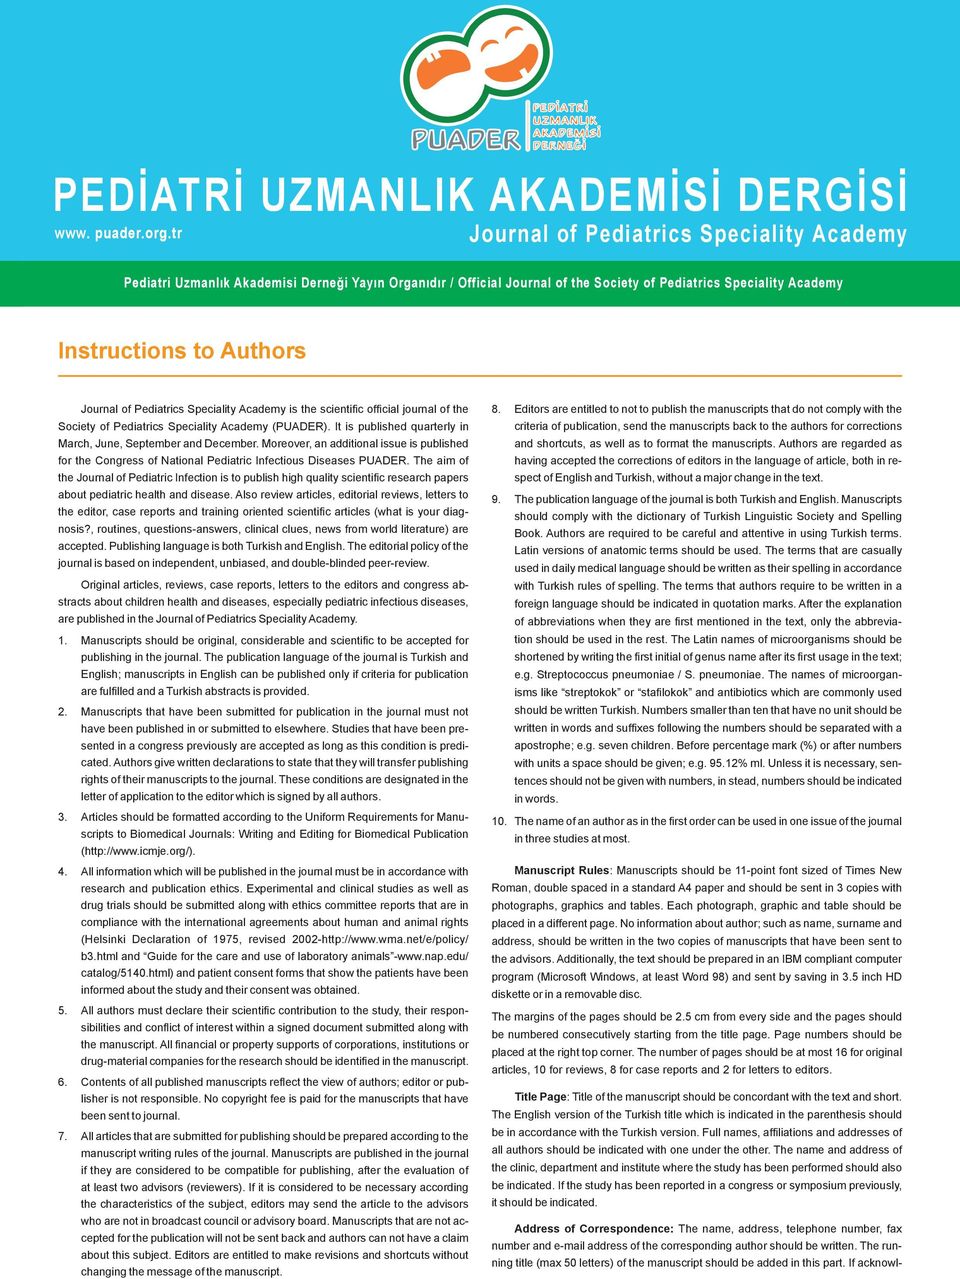 Pediatrics Speciality Academy is the scientific official journal of the Society of Pediatrics Speciality Academy (PUADER). It is published quarterly in March, June, September and December.